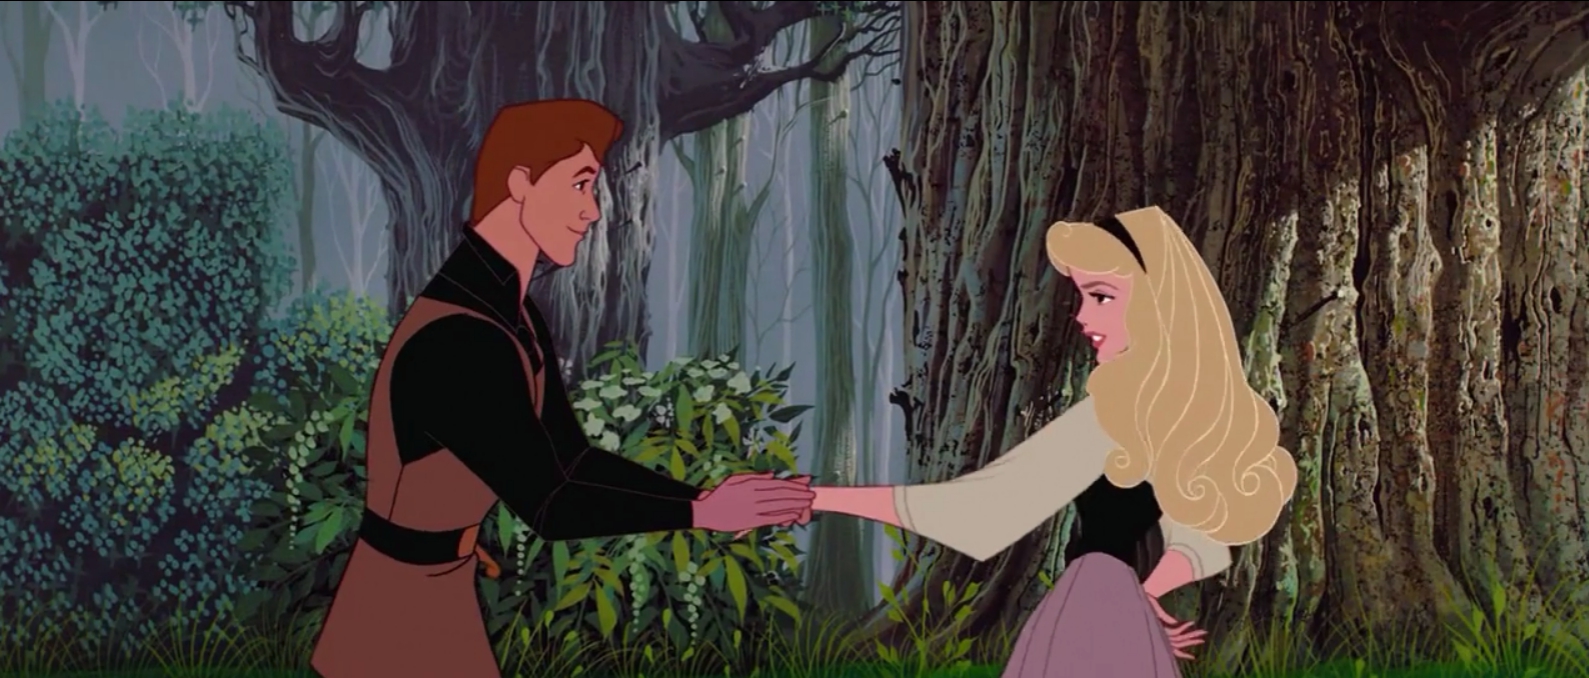 Sleeping Beauty Movie Review